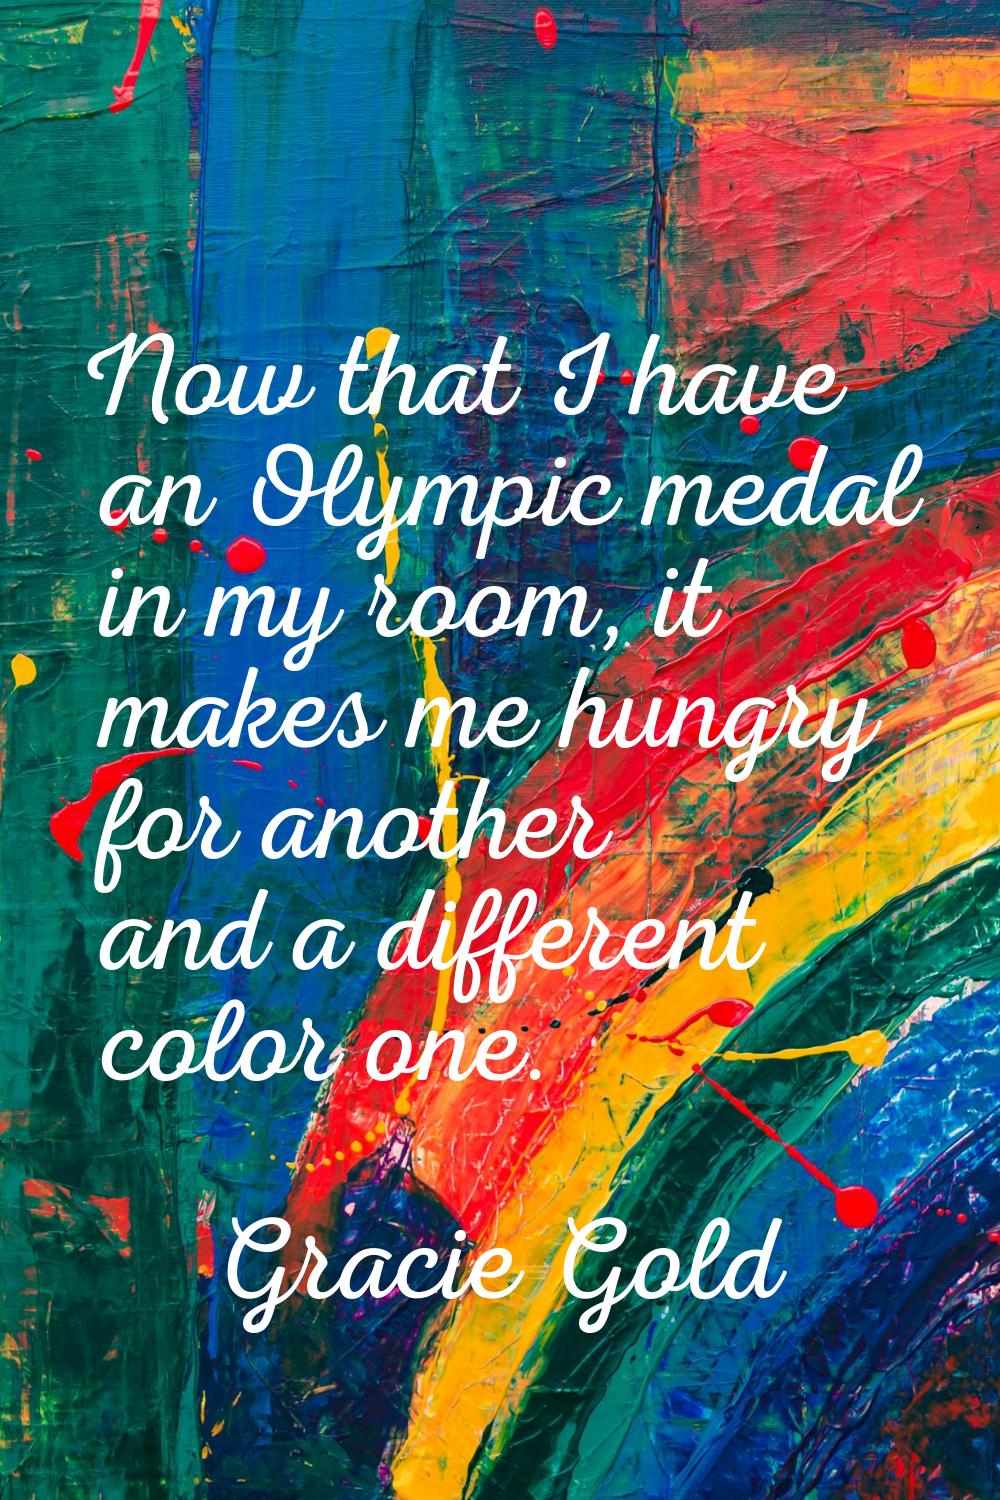 Now that I have an Olympic medal in my room, it makes me hungry for another and a different color o